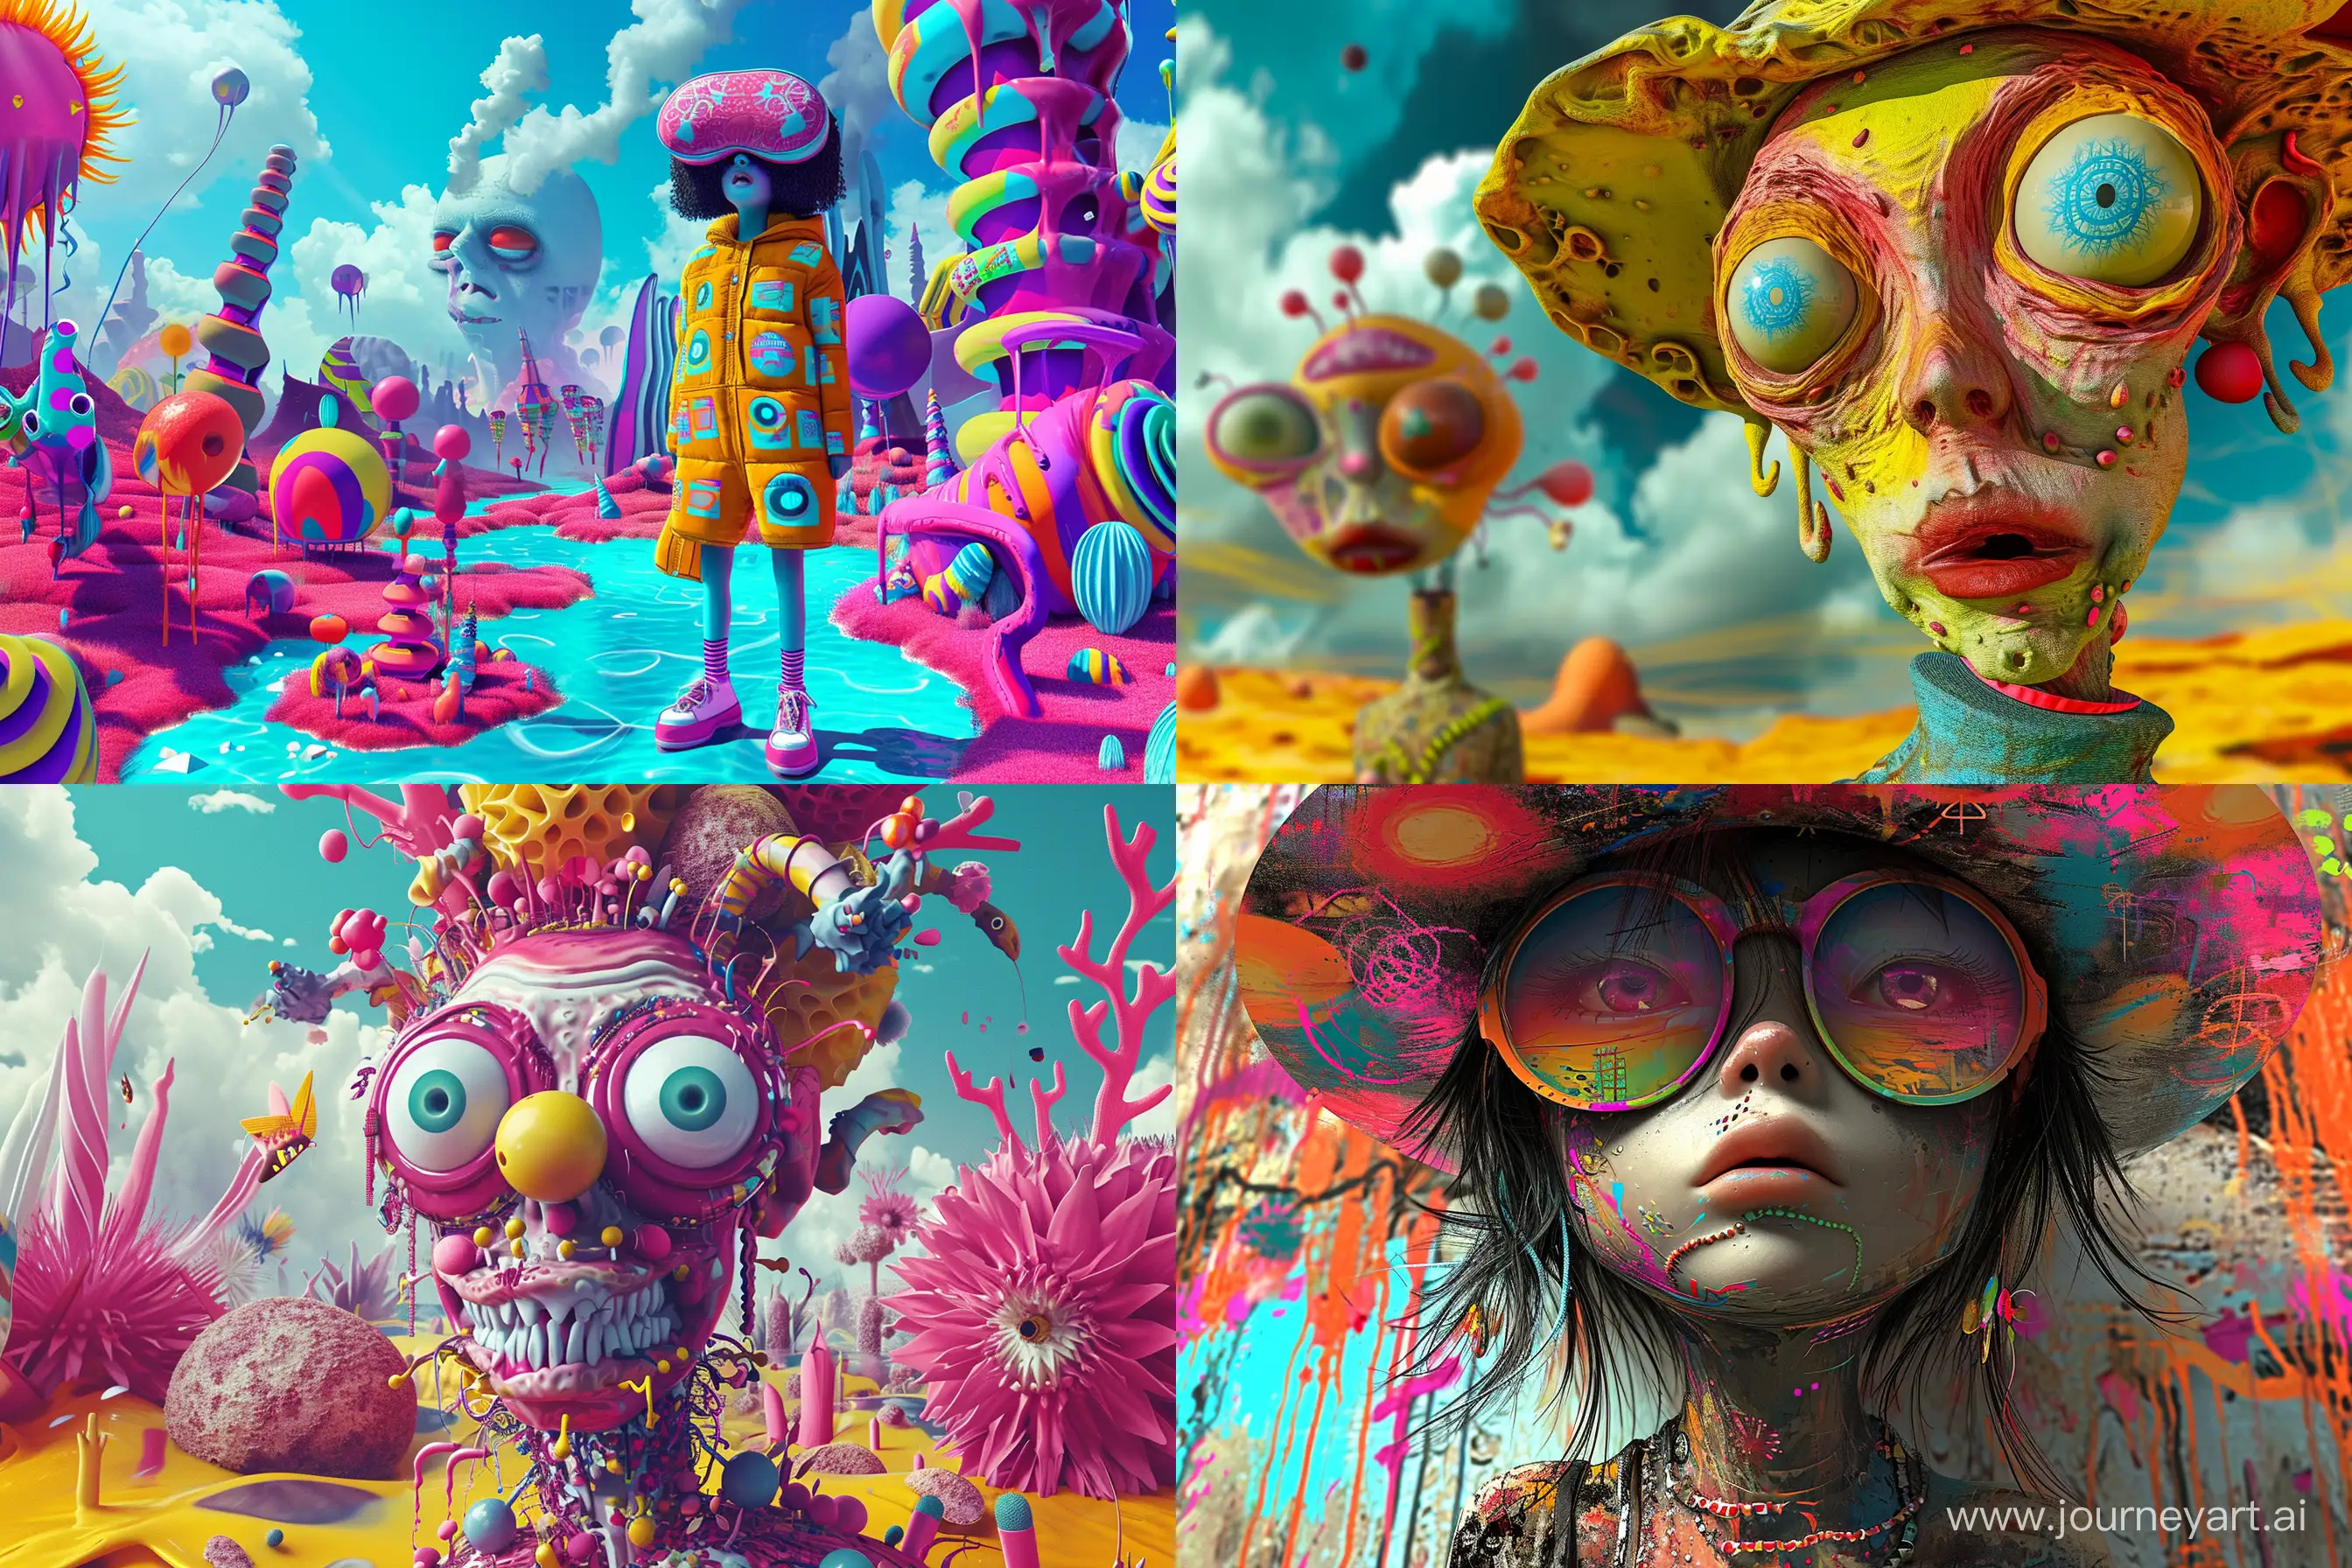 Pop Surrealism
A character in a vibrant and bizarre world, reminiscent of pop surrealism art. --ar 3:2